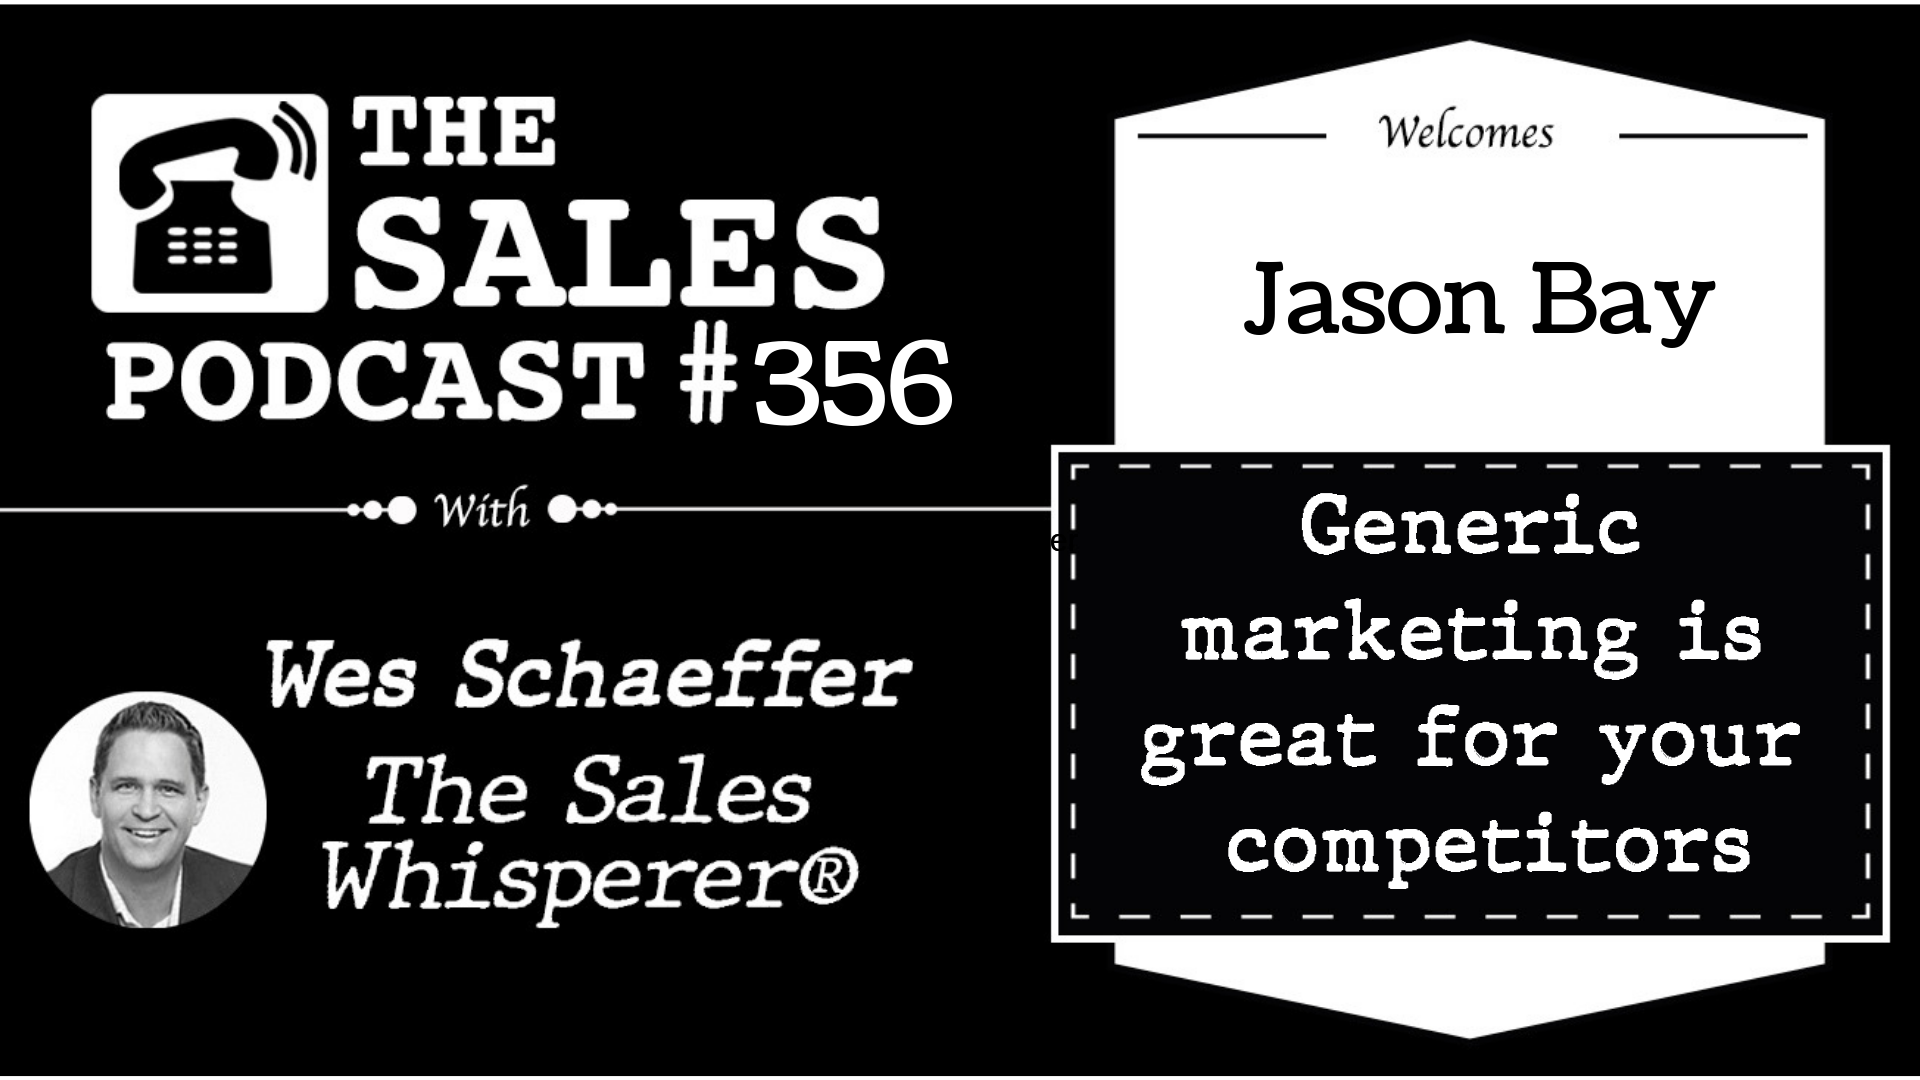 How To Set Appointments With Ideal Prospects, Jason Bay, discusses outbound marketing techniques on The Sales Podcast.